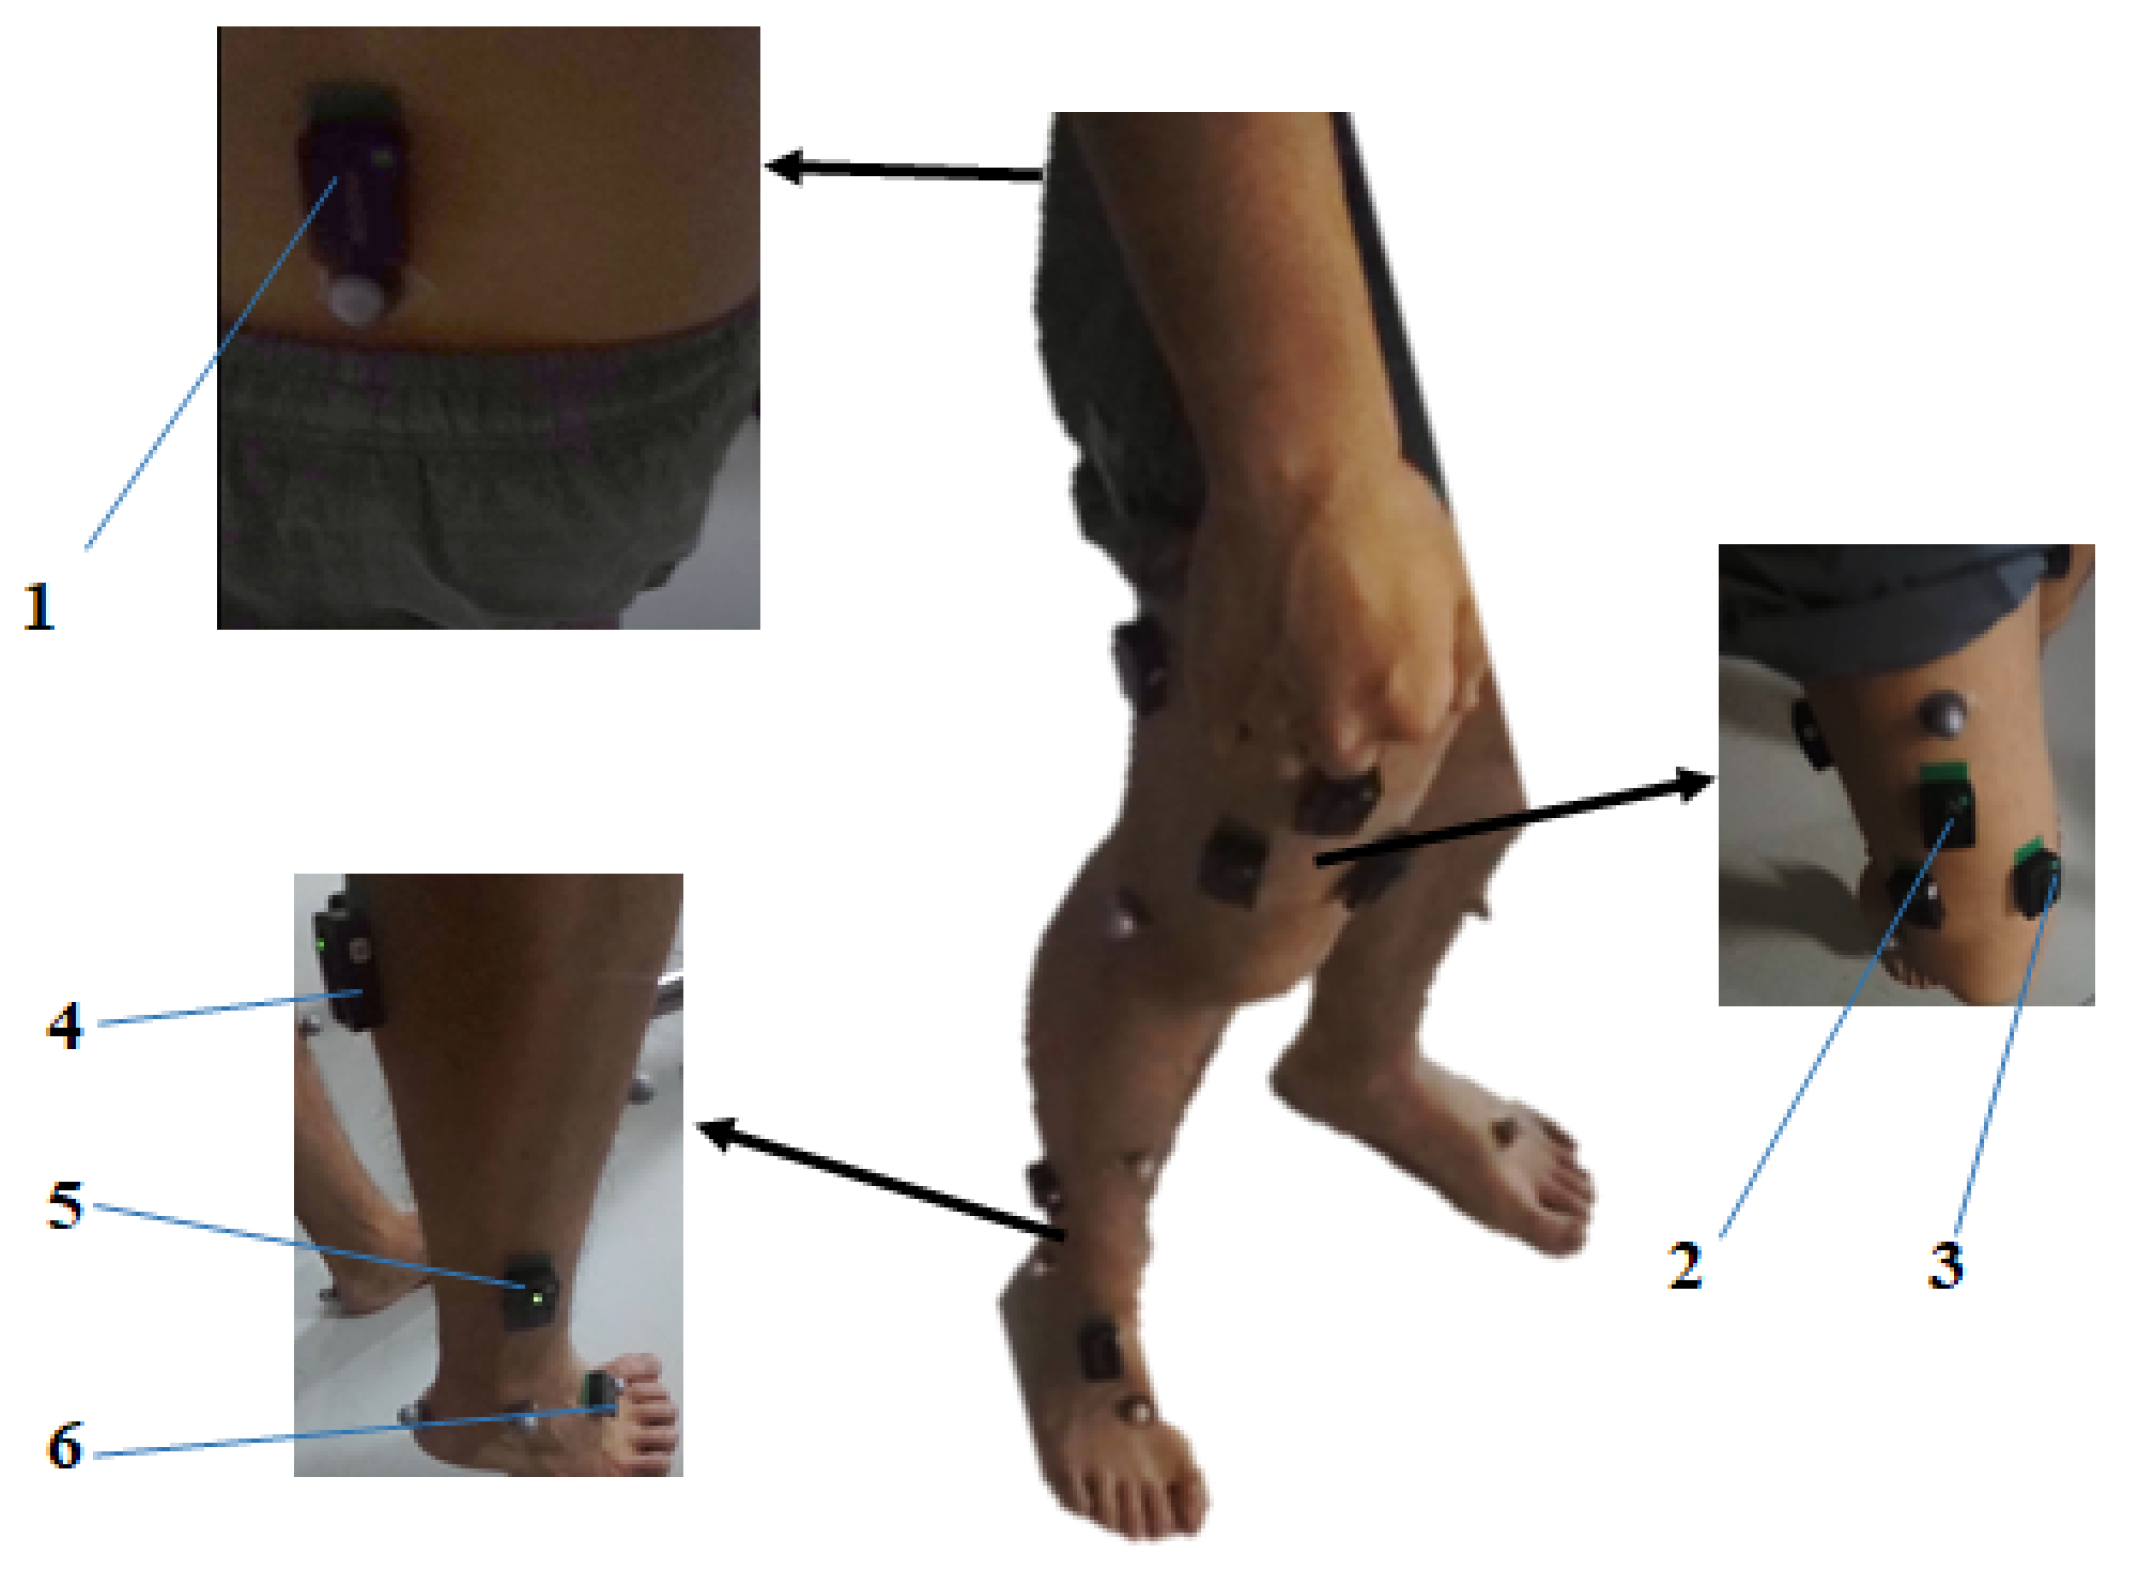 Image of the calf brace containing IMU, MMG, Vicon, and EMG